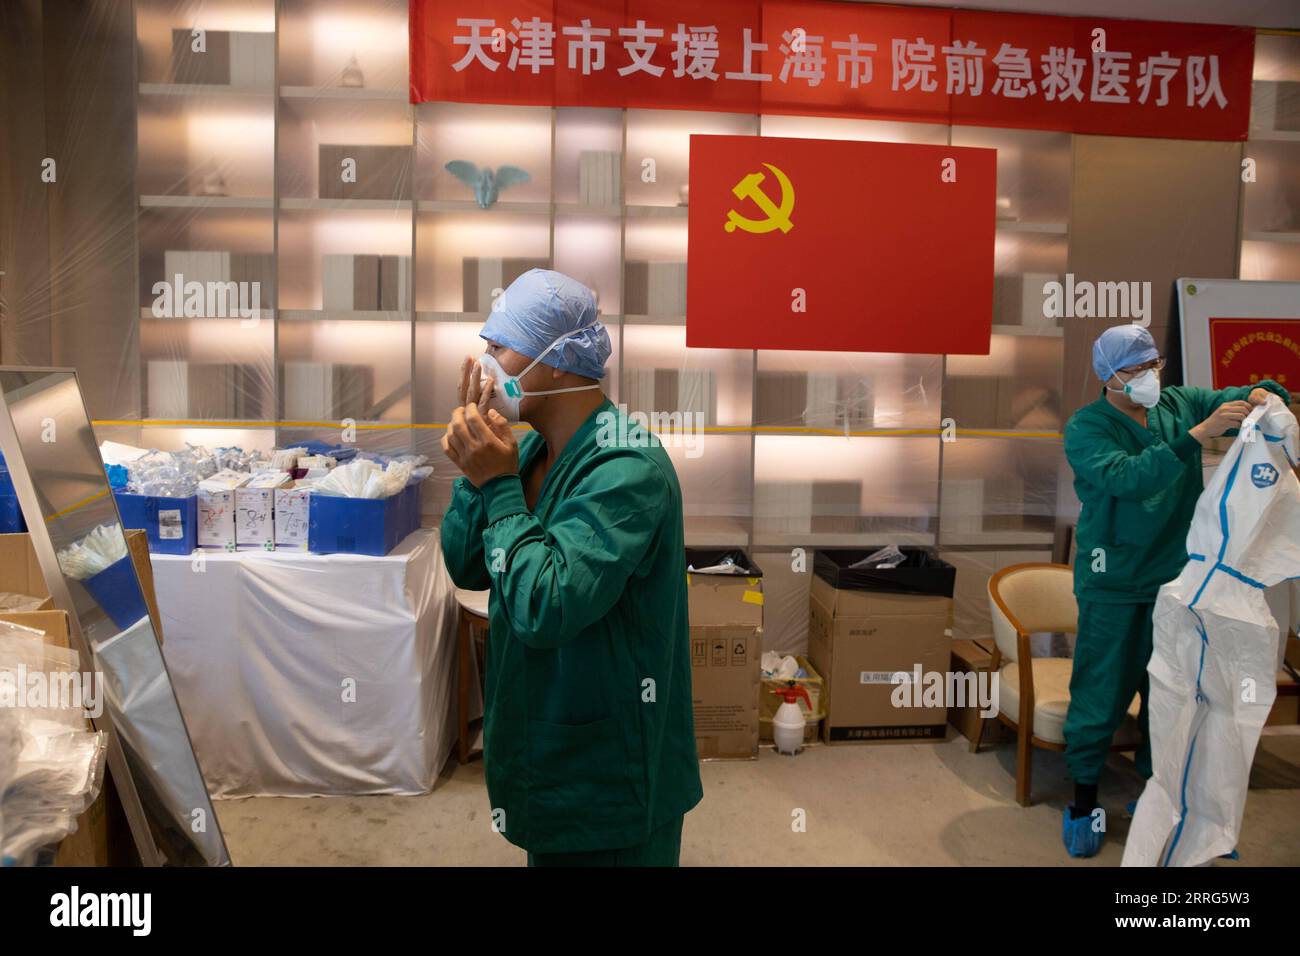 220510 -- SHANGHAI, May 10, 2022 -- Meng Xiangjun and Zhang Zhimin L wear protective suits at the headquarters of a medical emergency team on Caoyang Road in east China s Shanghai, May 9, 2022. A medical emergency team consisting of 108 members with 50 ambulances from north China s Tianjin has arrived at Shanghai to assist in the city s public medical emergency service amid the COVID-19 resurgence.  CHINA-SHANGHAI-MEDICAL TEAM-COVID-19-AID CN JinxLiwang PUBLICATIONxNOTxINxCHN Stock Photo